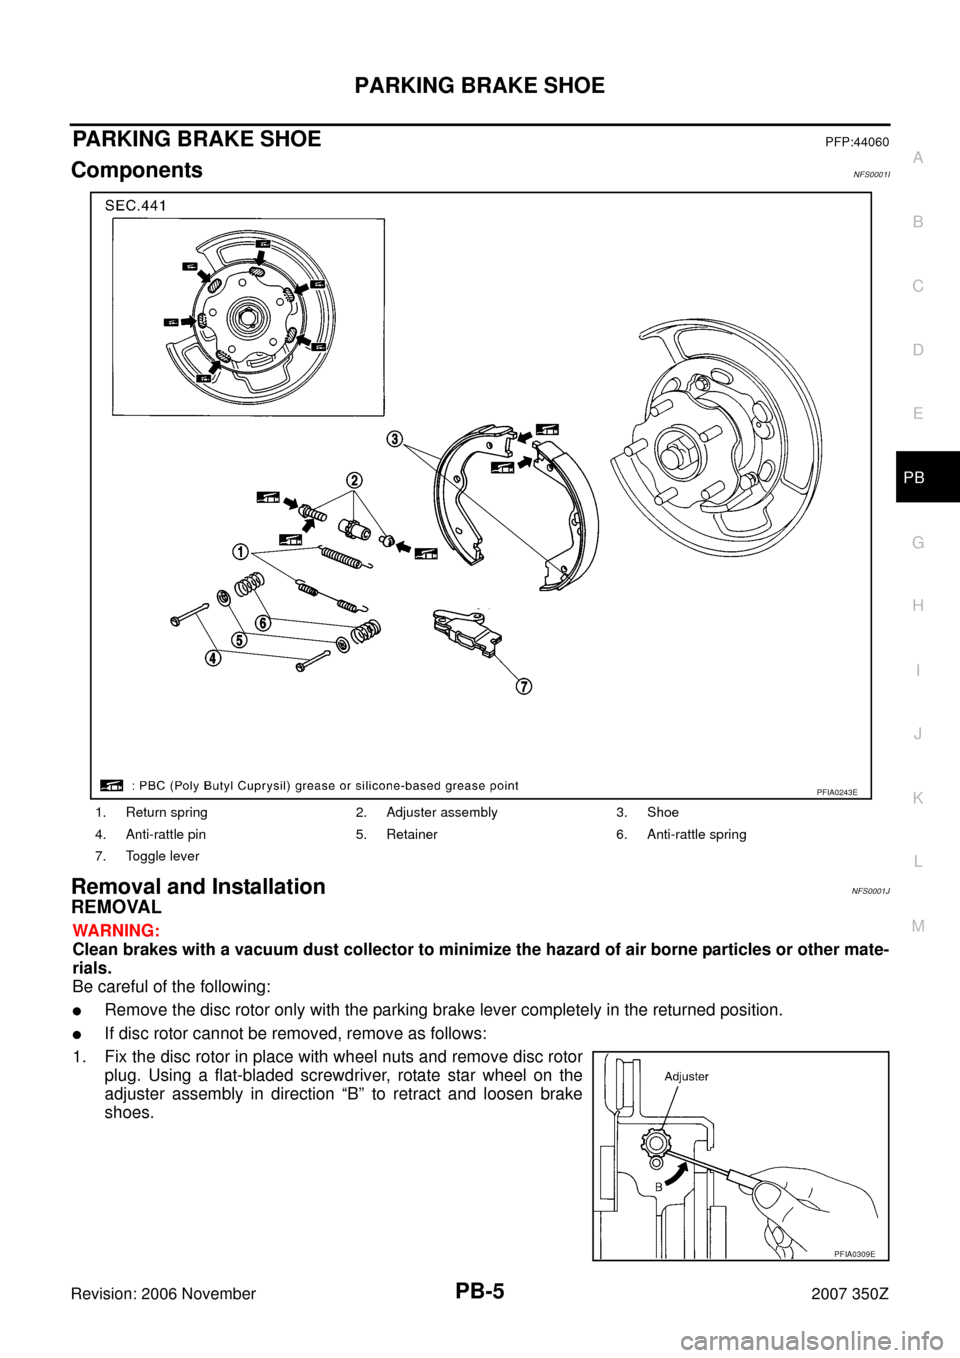 NISSAN 350Z 2007 Z33 Parking Brake System Workshop Manual PARKING BRAKE SHOE
PB-5
C
D
E
G
H
I
J
K
L
MA
B
PB
Revision: 2006 November2007 350Z
PARKING BRAKE SHOEPFP:44060
ComponentsNFS0001I
Removal and InstallationNFS0001J
REMOVAL
WARNING:
Clean brakes with a 